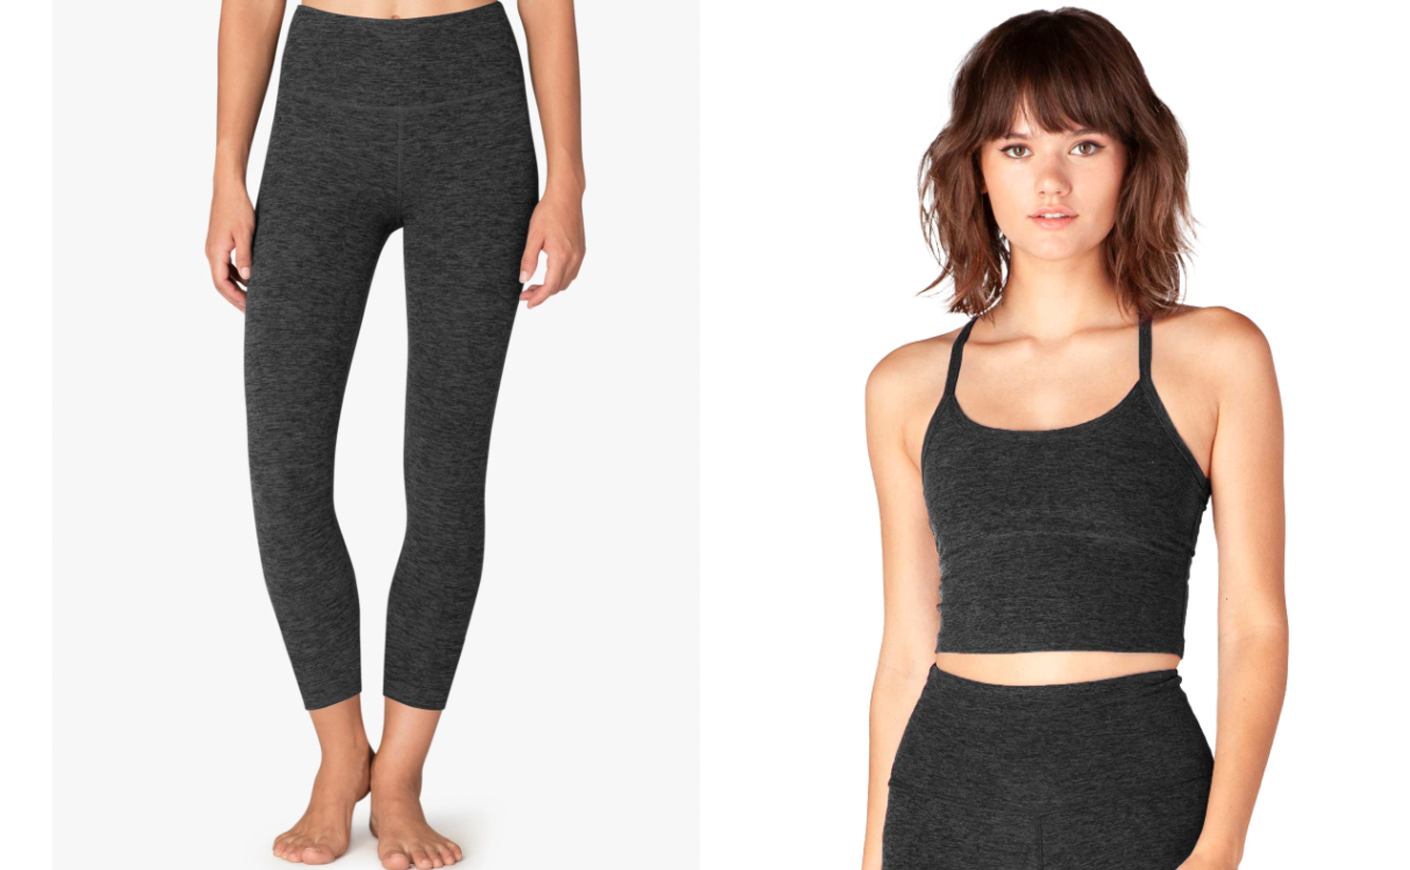 The Best Workout Gear for Your Home Studio